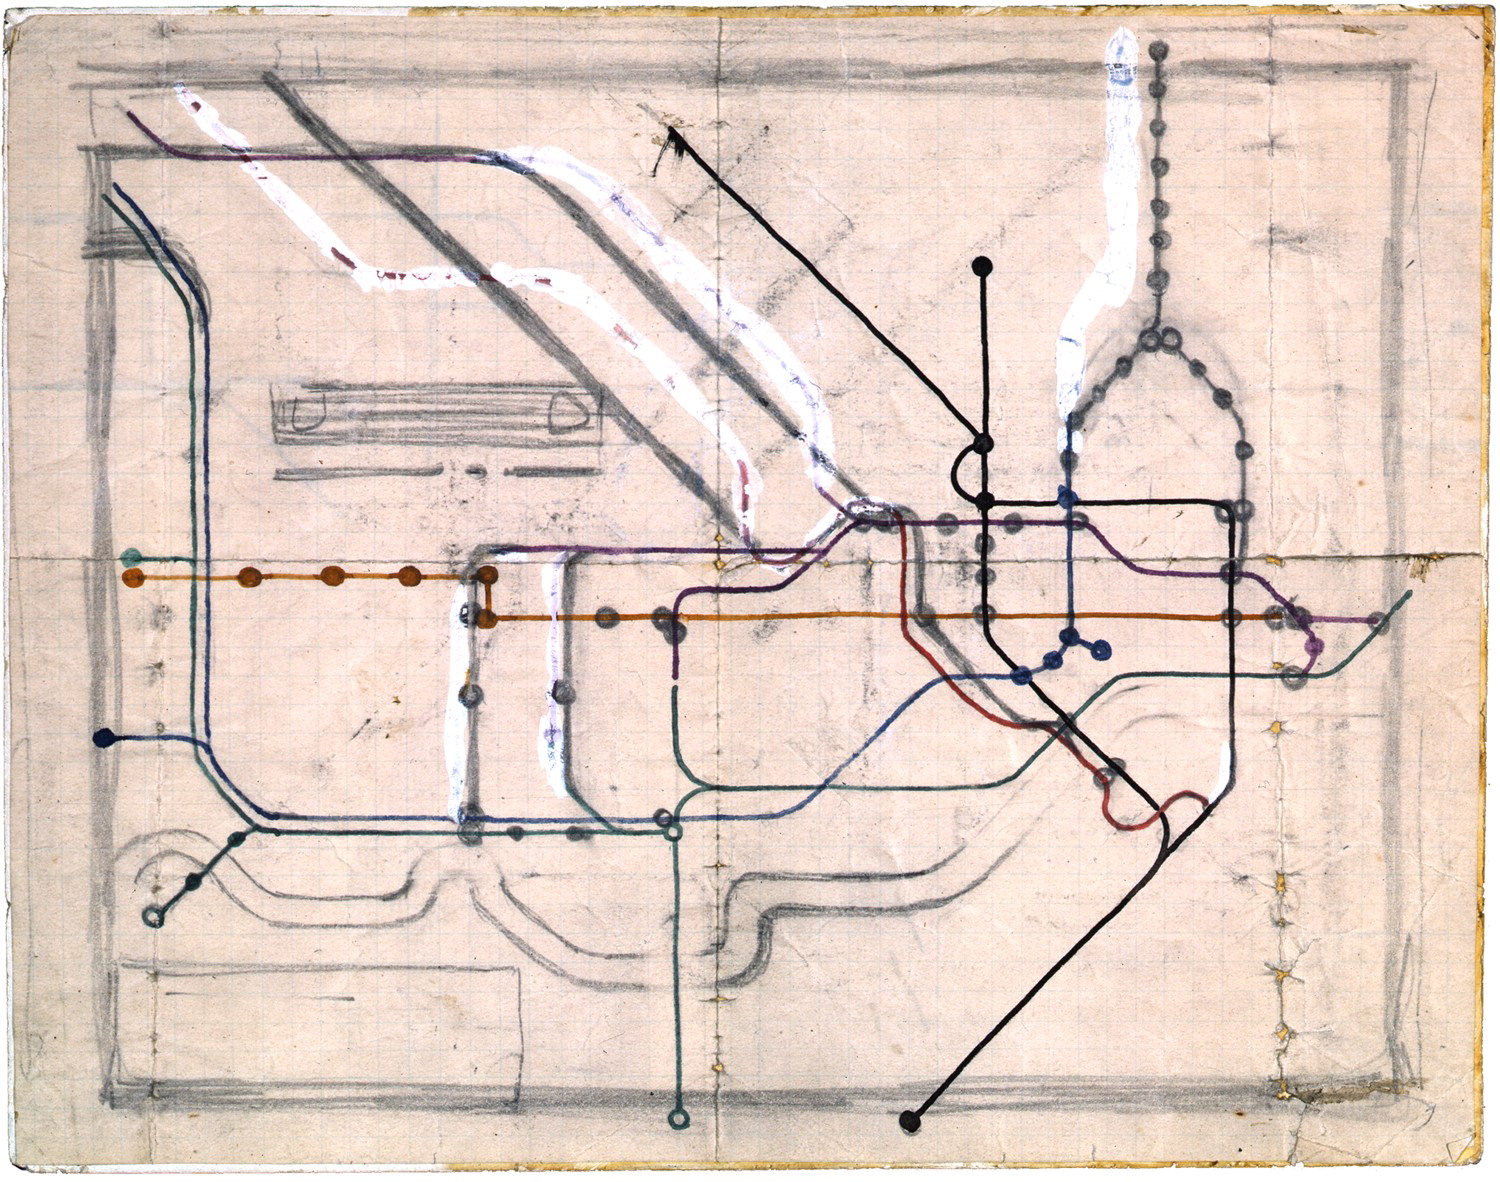 1931 sketch for a diagrammatic transit map of the London Underground by Harry Beck